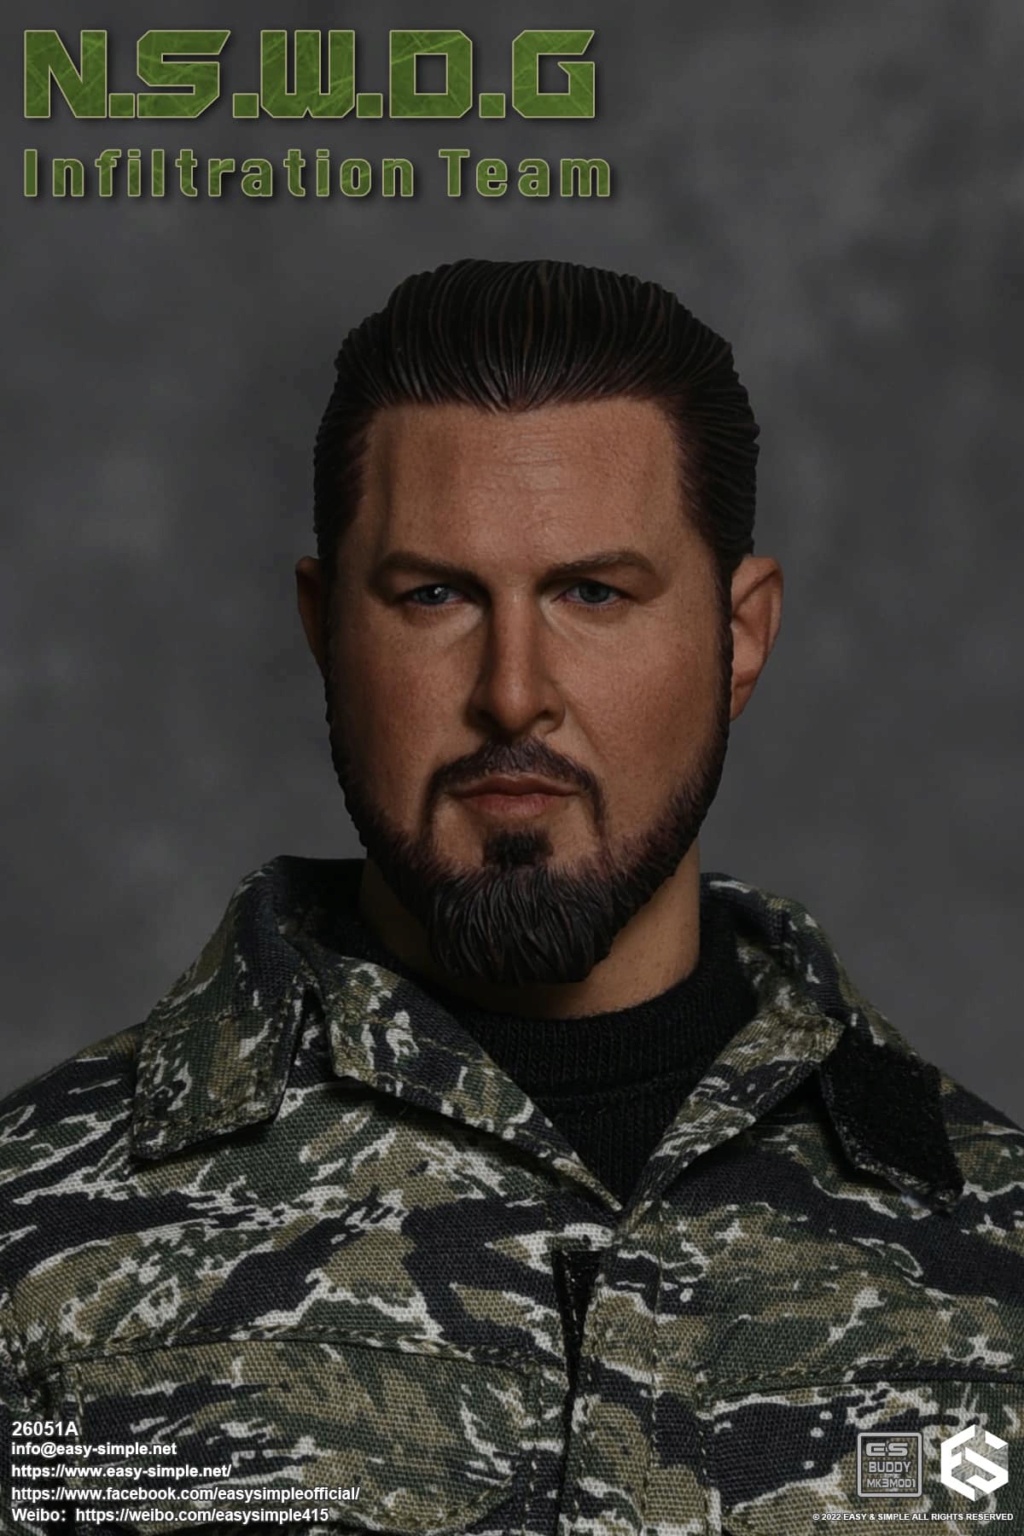 ModernMilitary - NEW PRODUCT: EASY AND SIMPLE 1/6 SCALE FIGURE: N.S.W.D.G INFILTRATION TEAM - (2 Versions) 27124